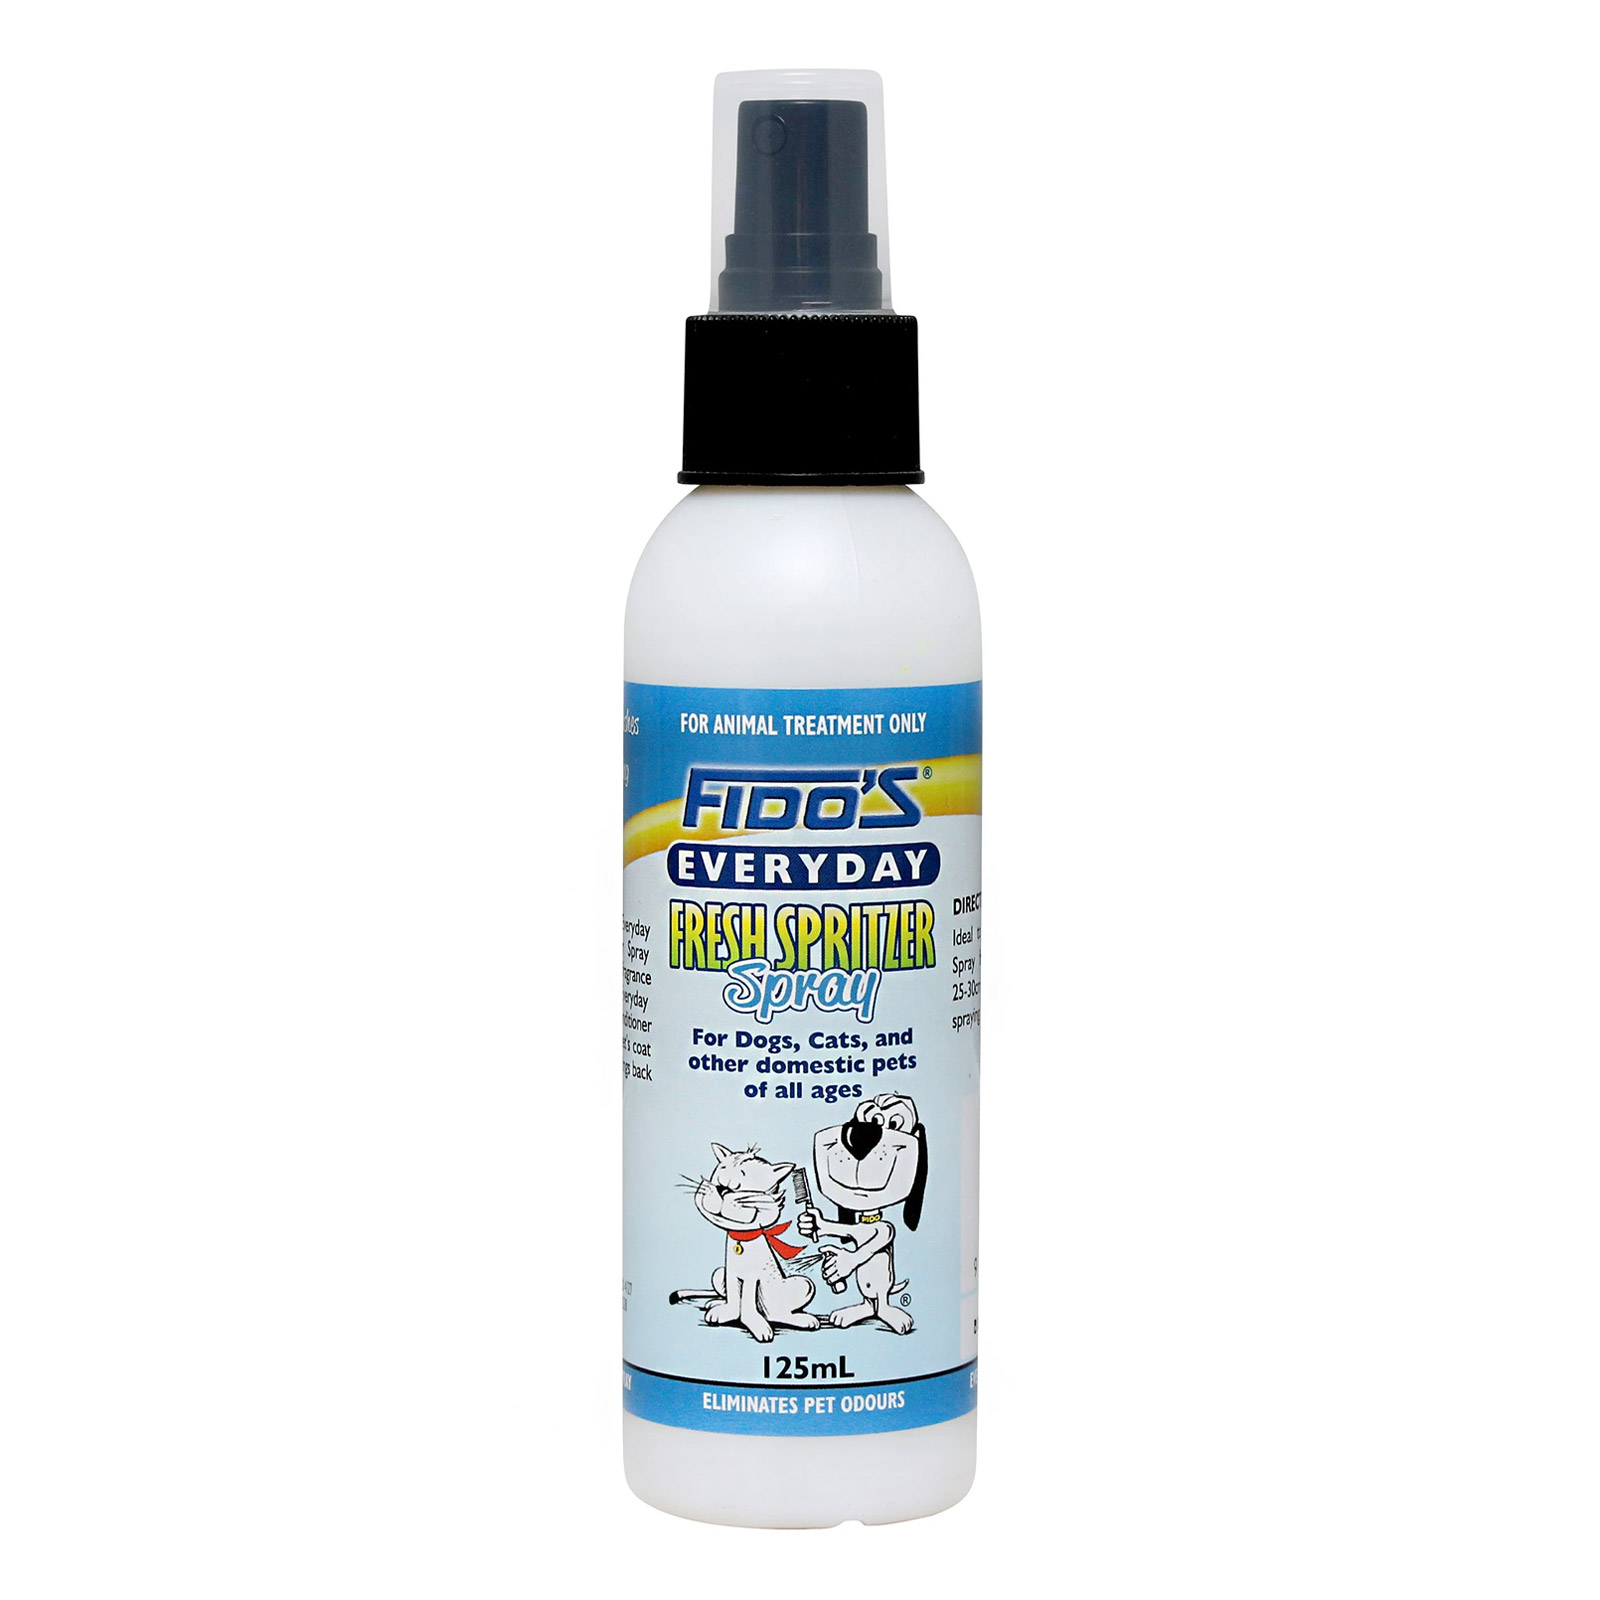 Fido's EveryDay Spritzer for Dogs